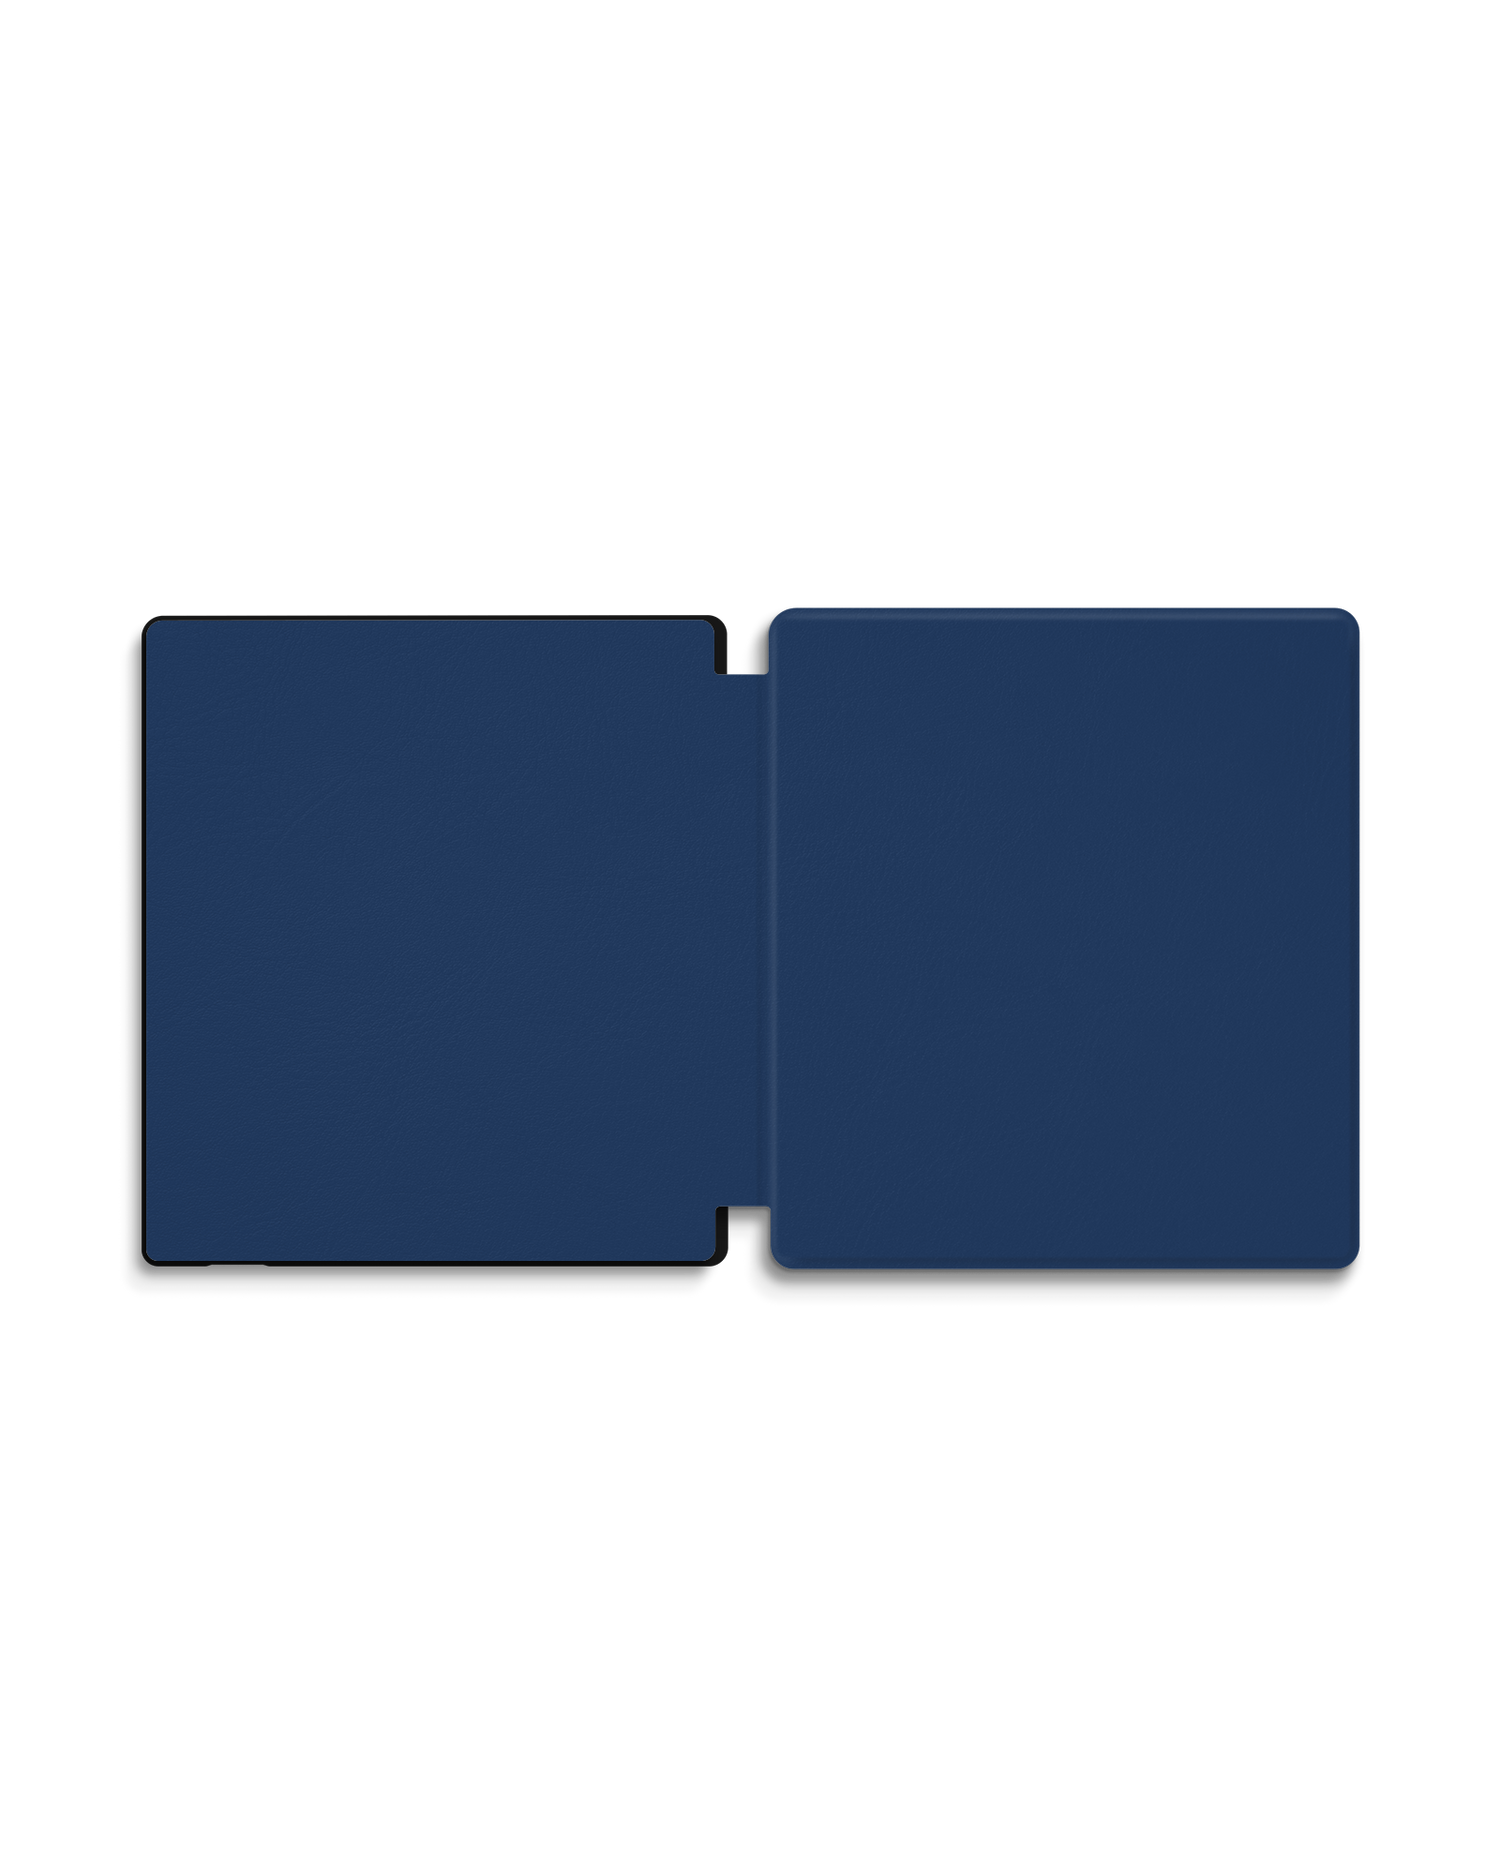 NAVY eReader Smart Case for Amazon Kindle Oasis: Opened exterior view